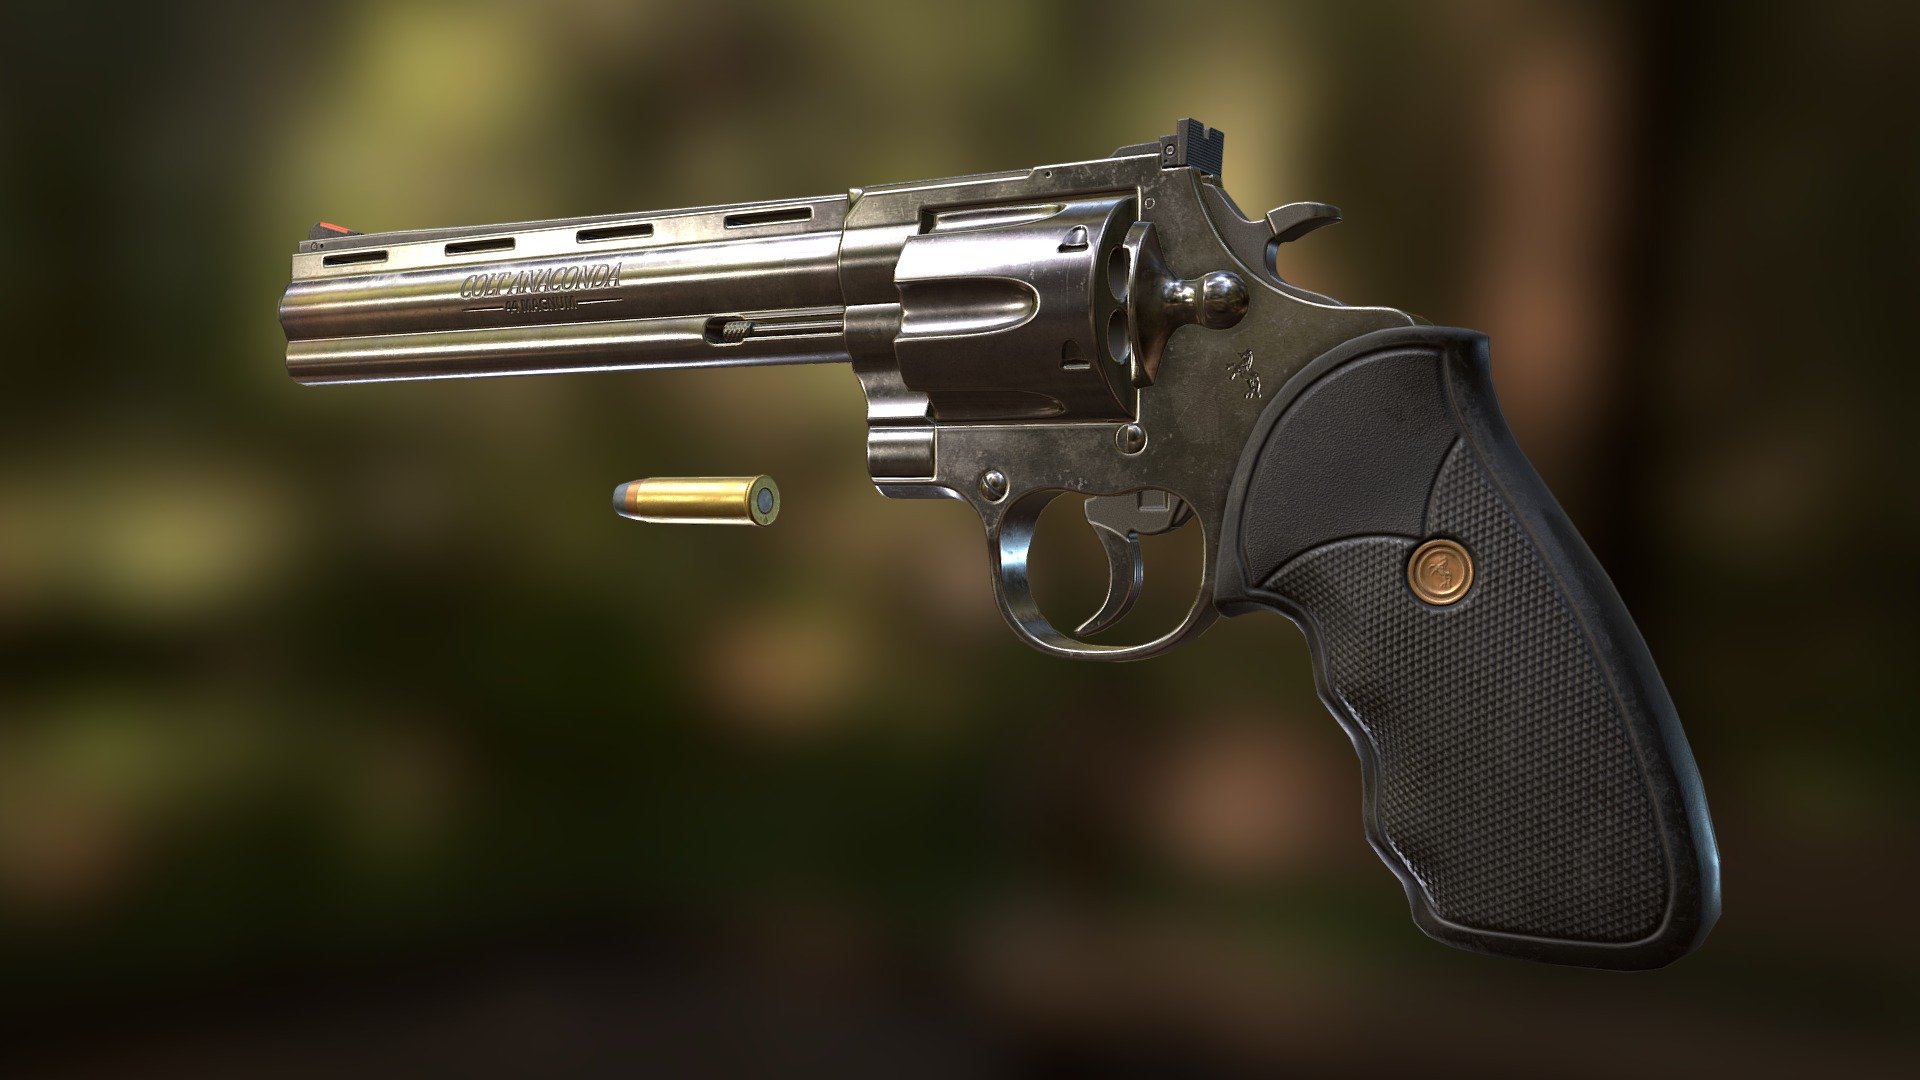 The Colt Anaconda is a large-bore magnum, double-action revolver. At 13 inches in length, and chambered for the powerful .44 Magnum, it packs a punch! - Colt Anaconda Revolver (Chrome) - 3D model by Vert-Candy (@VertCandy) 3d model